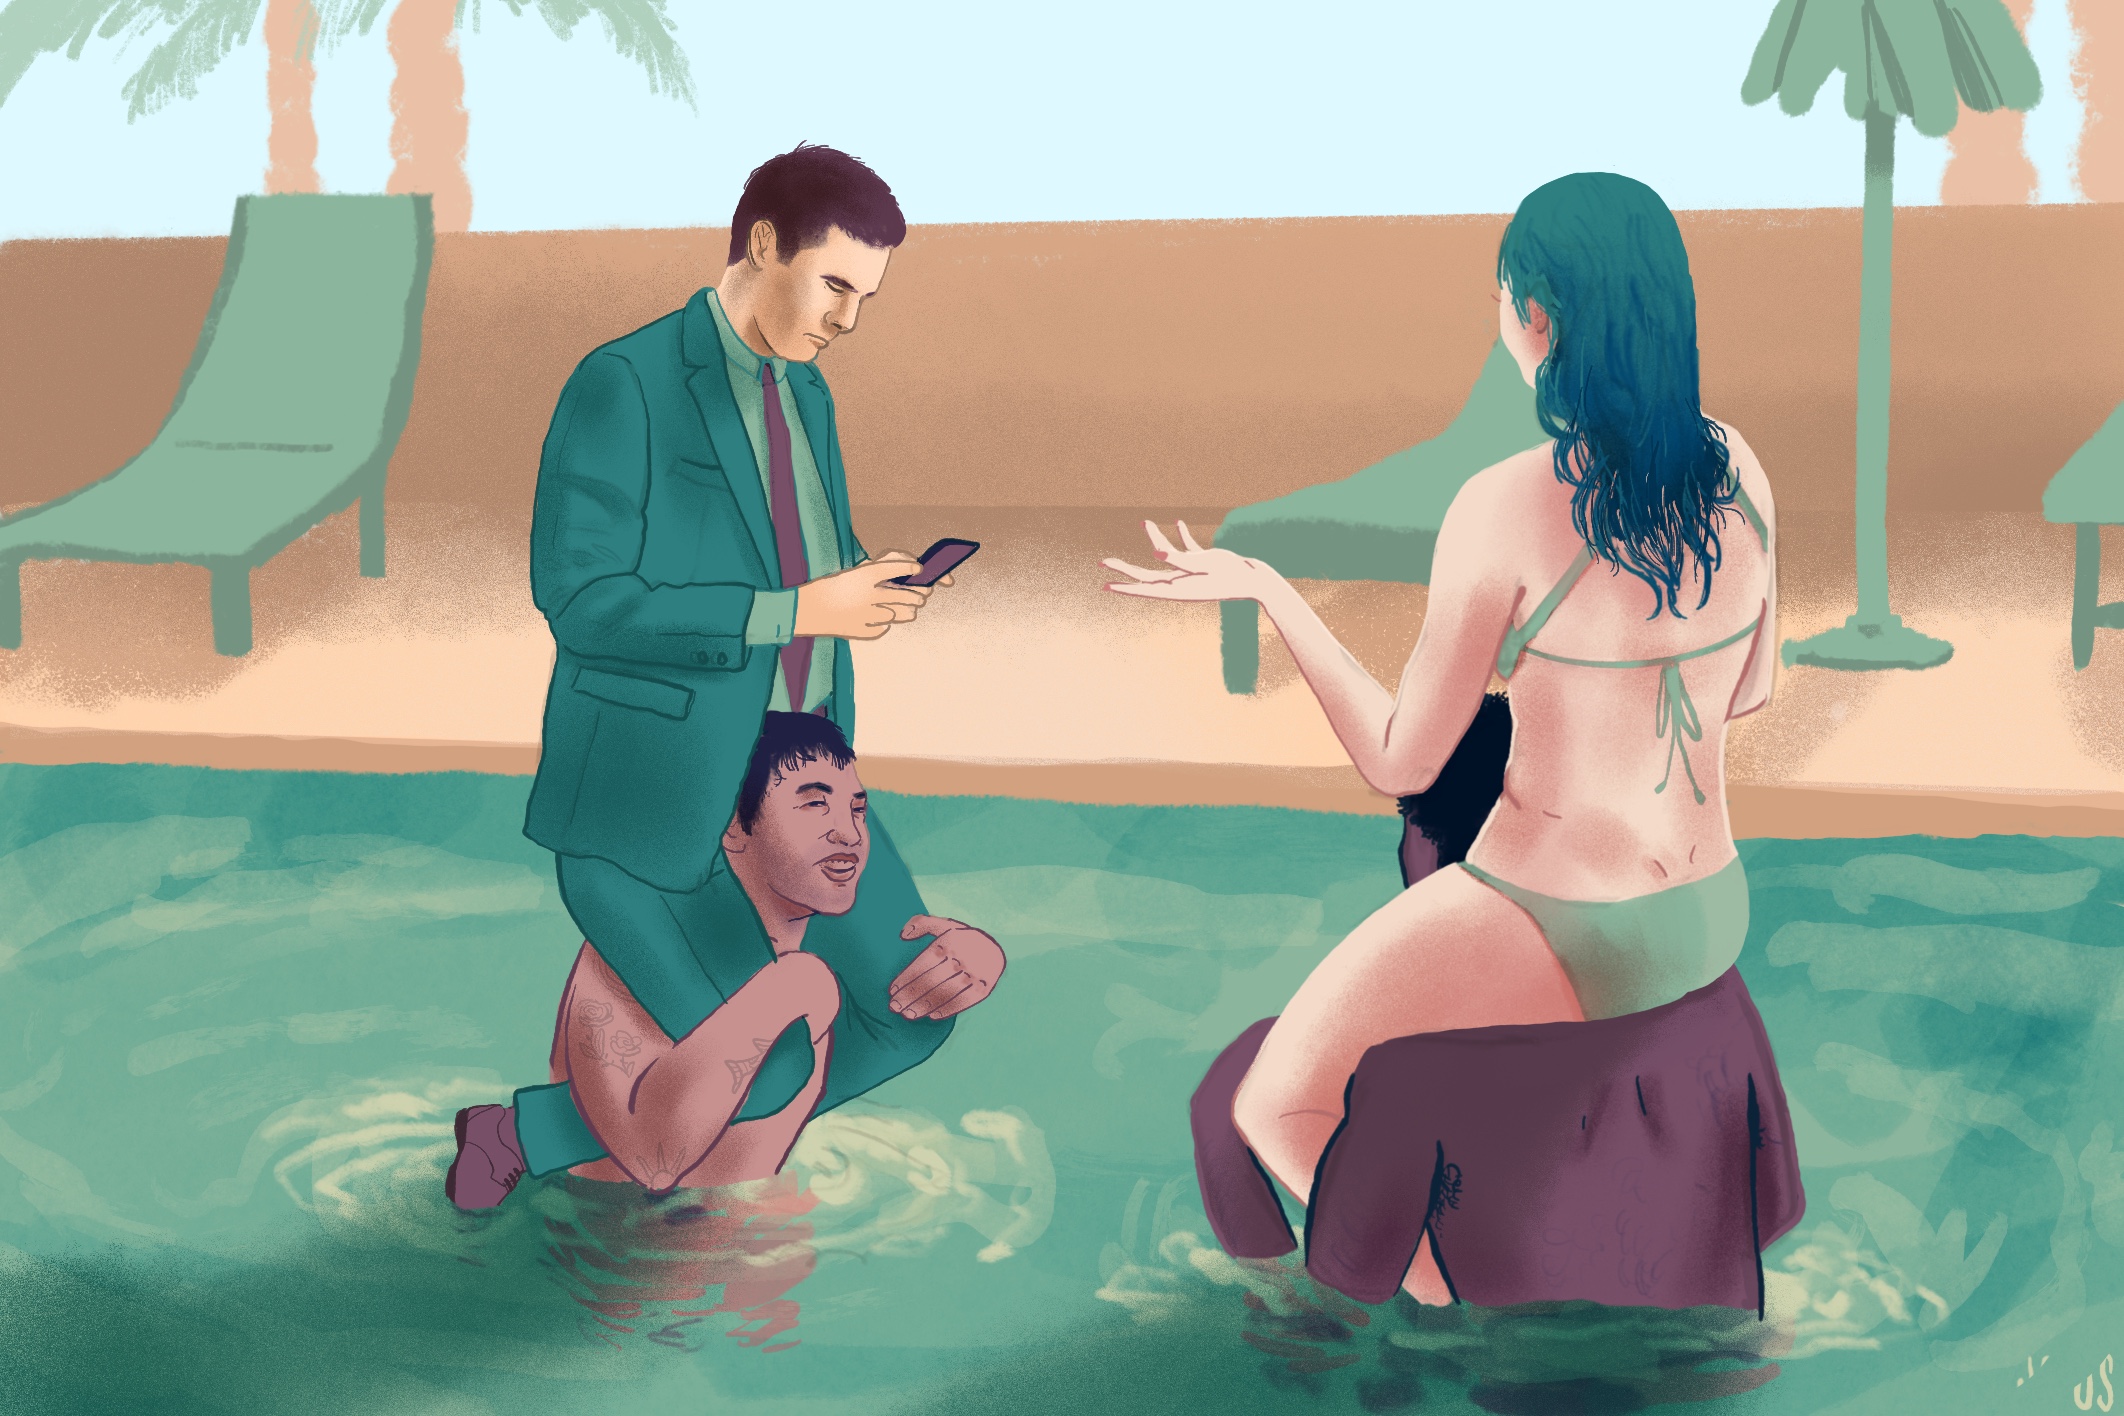 In an illustration, our people play a game of chicken in a pool